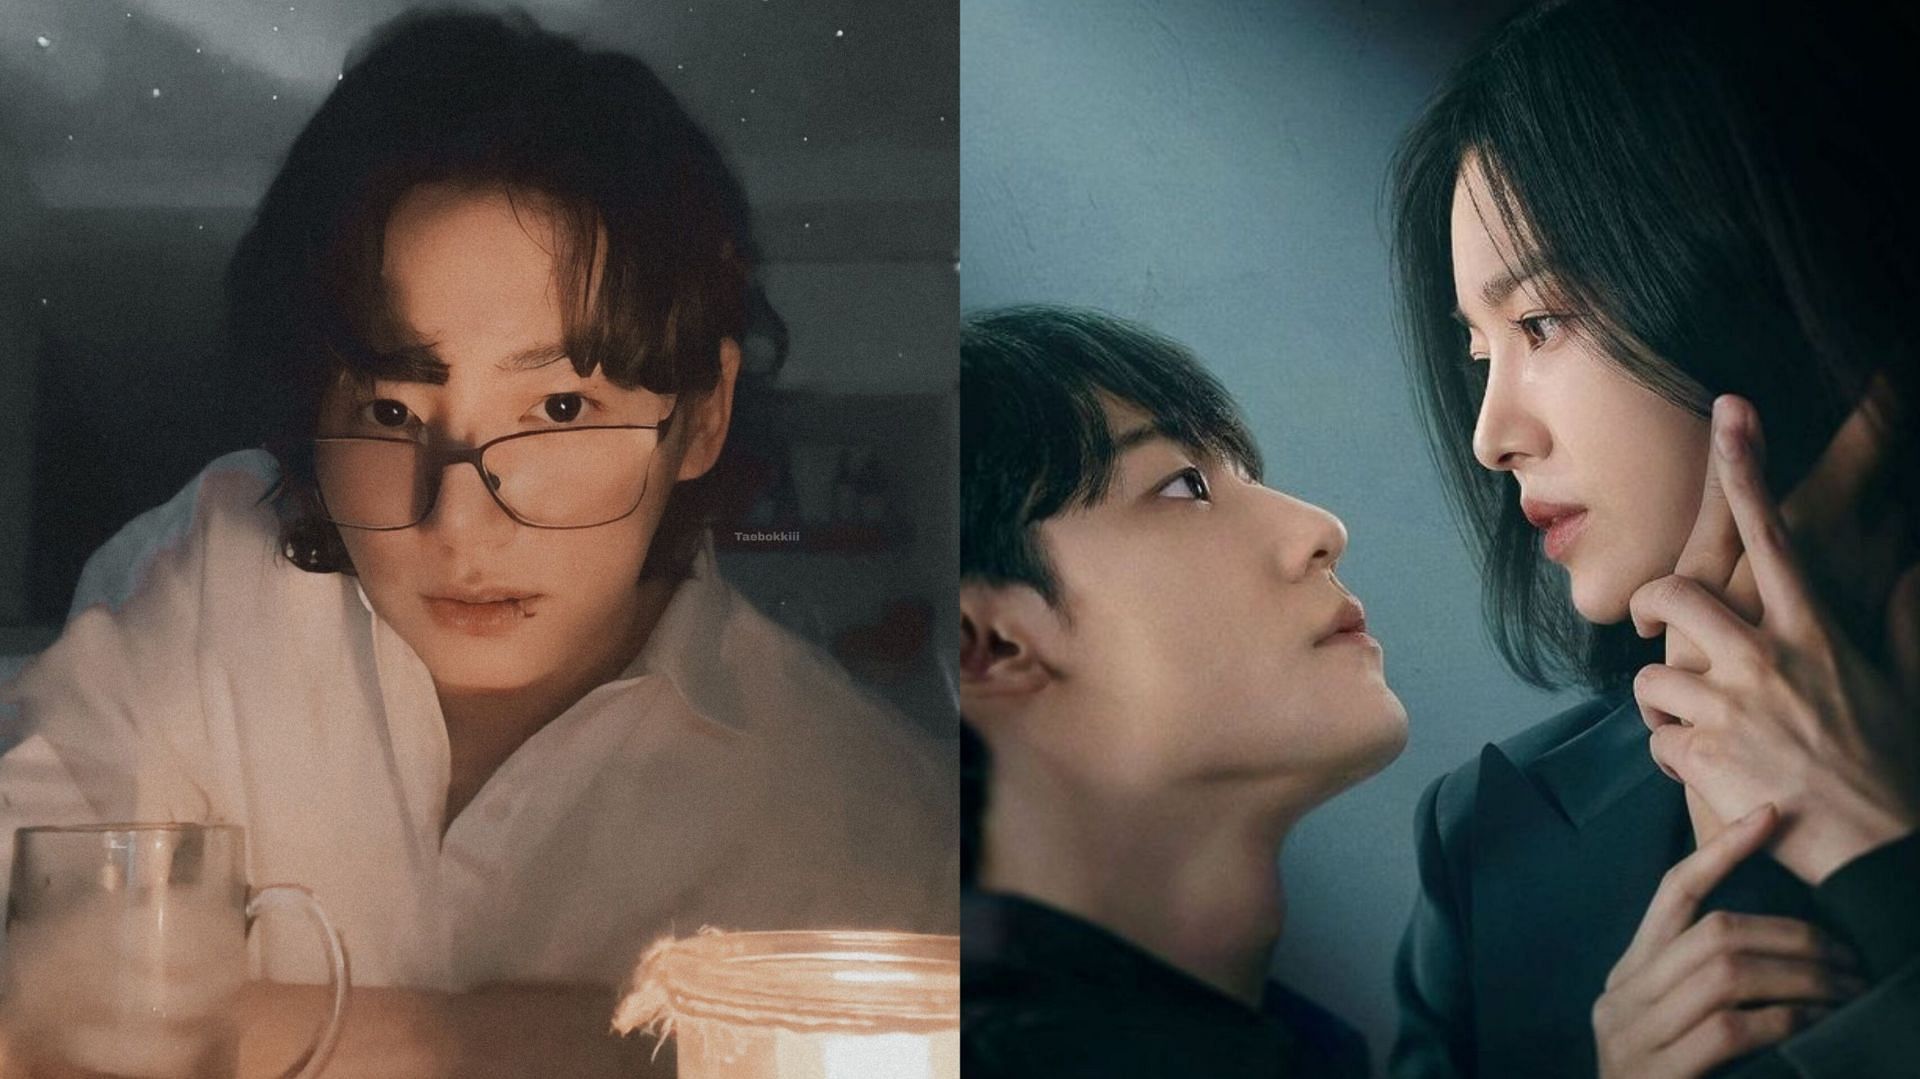 Featuring Jungkook, Lee Do-hyun and Song Hye-kyo (Image via taebokiii Twitter and Netflix)